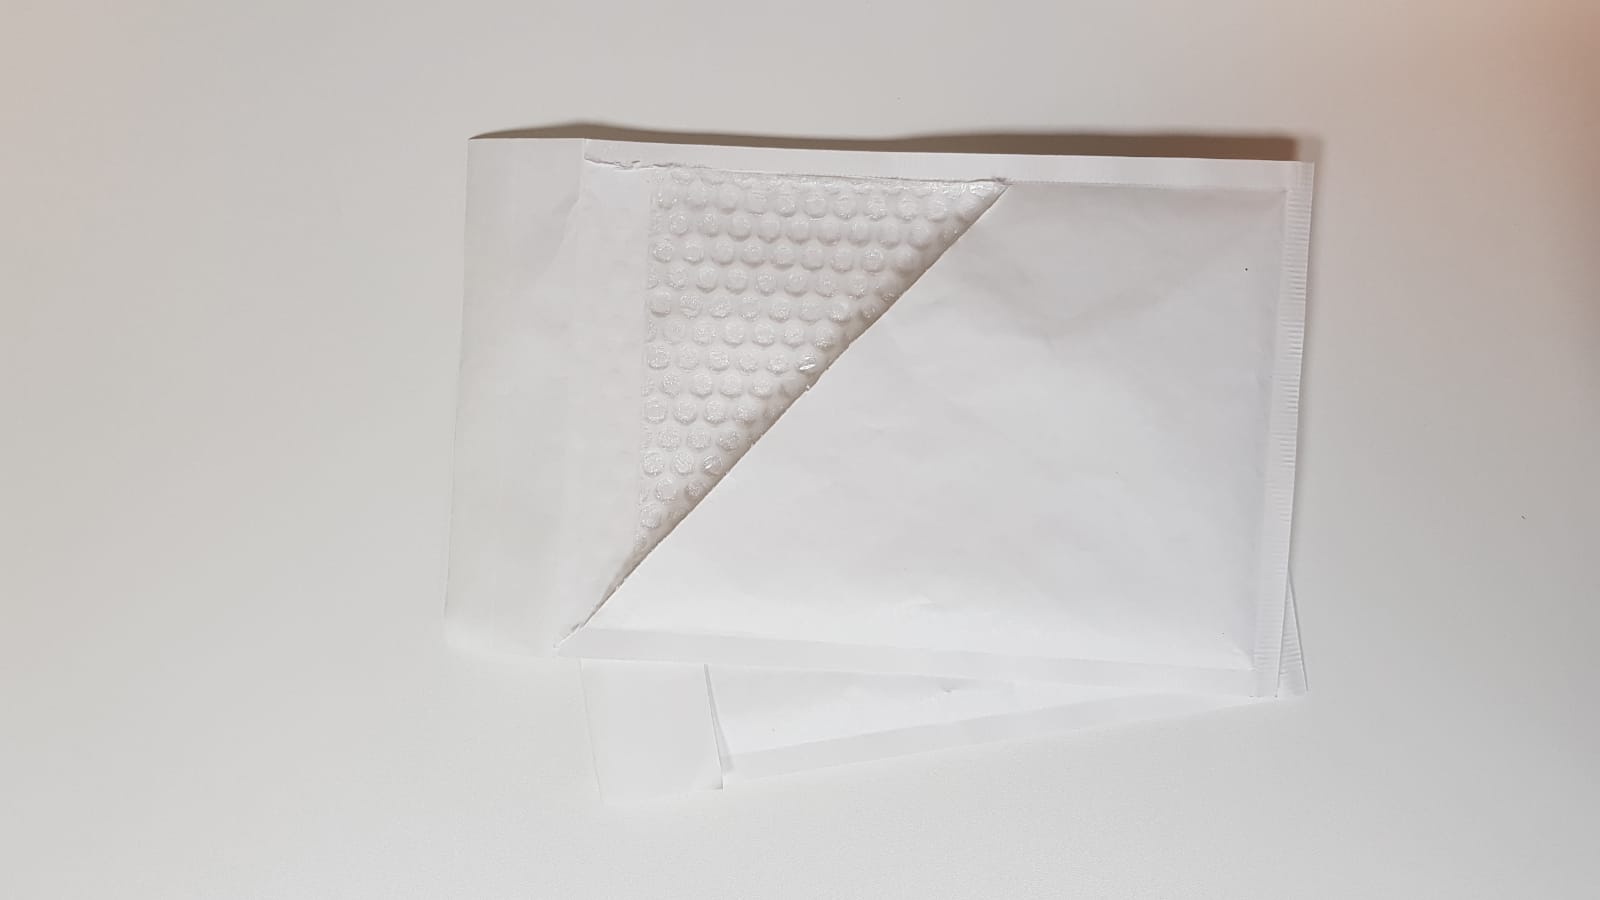 Padded bag 350 X 470mm (and various sizes) - Airship White Peel & Seal Padded Bags